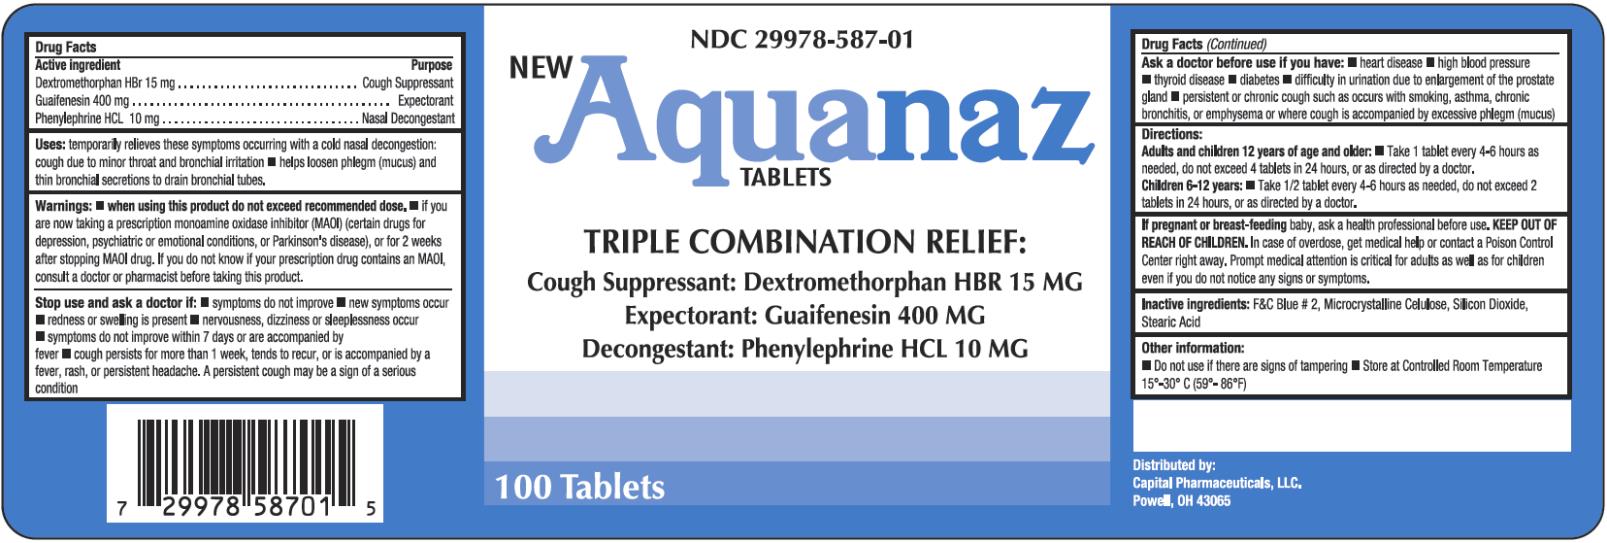 PRINCIPAL DISPLAY PANEL
NDC 29978-587-01
NEW
Aquanaz
TABLETS
TRIPLE COMBINATION RELIEF:
Cough Suppressant: Dextromethorphan HBR 15 MG
Expectorant: Guaifenesin 400 MG
Decongestant: Phenylephrine HCL 10